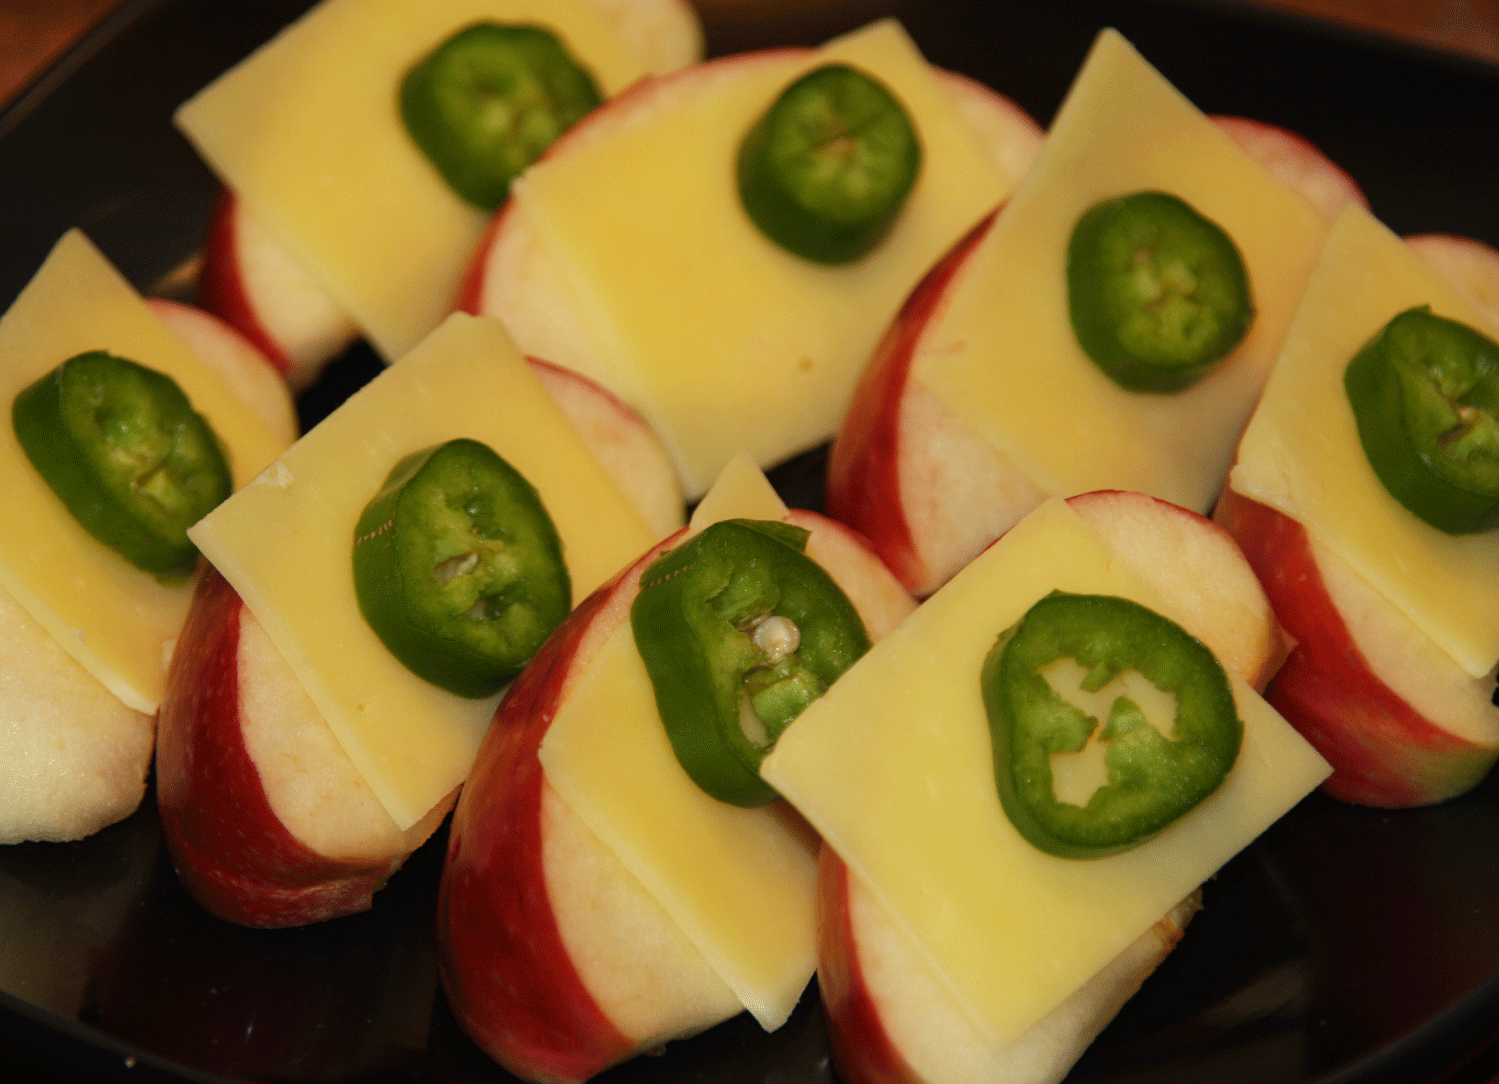 fior-di-vita-cheddar-slices-with-Jalapeno-apple-wedges-main